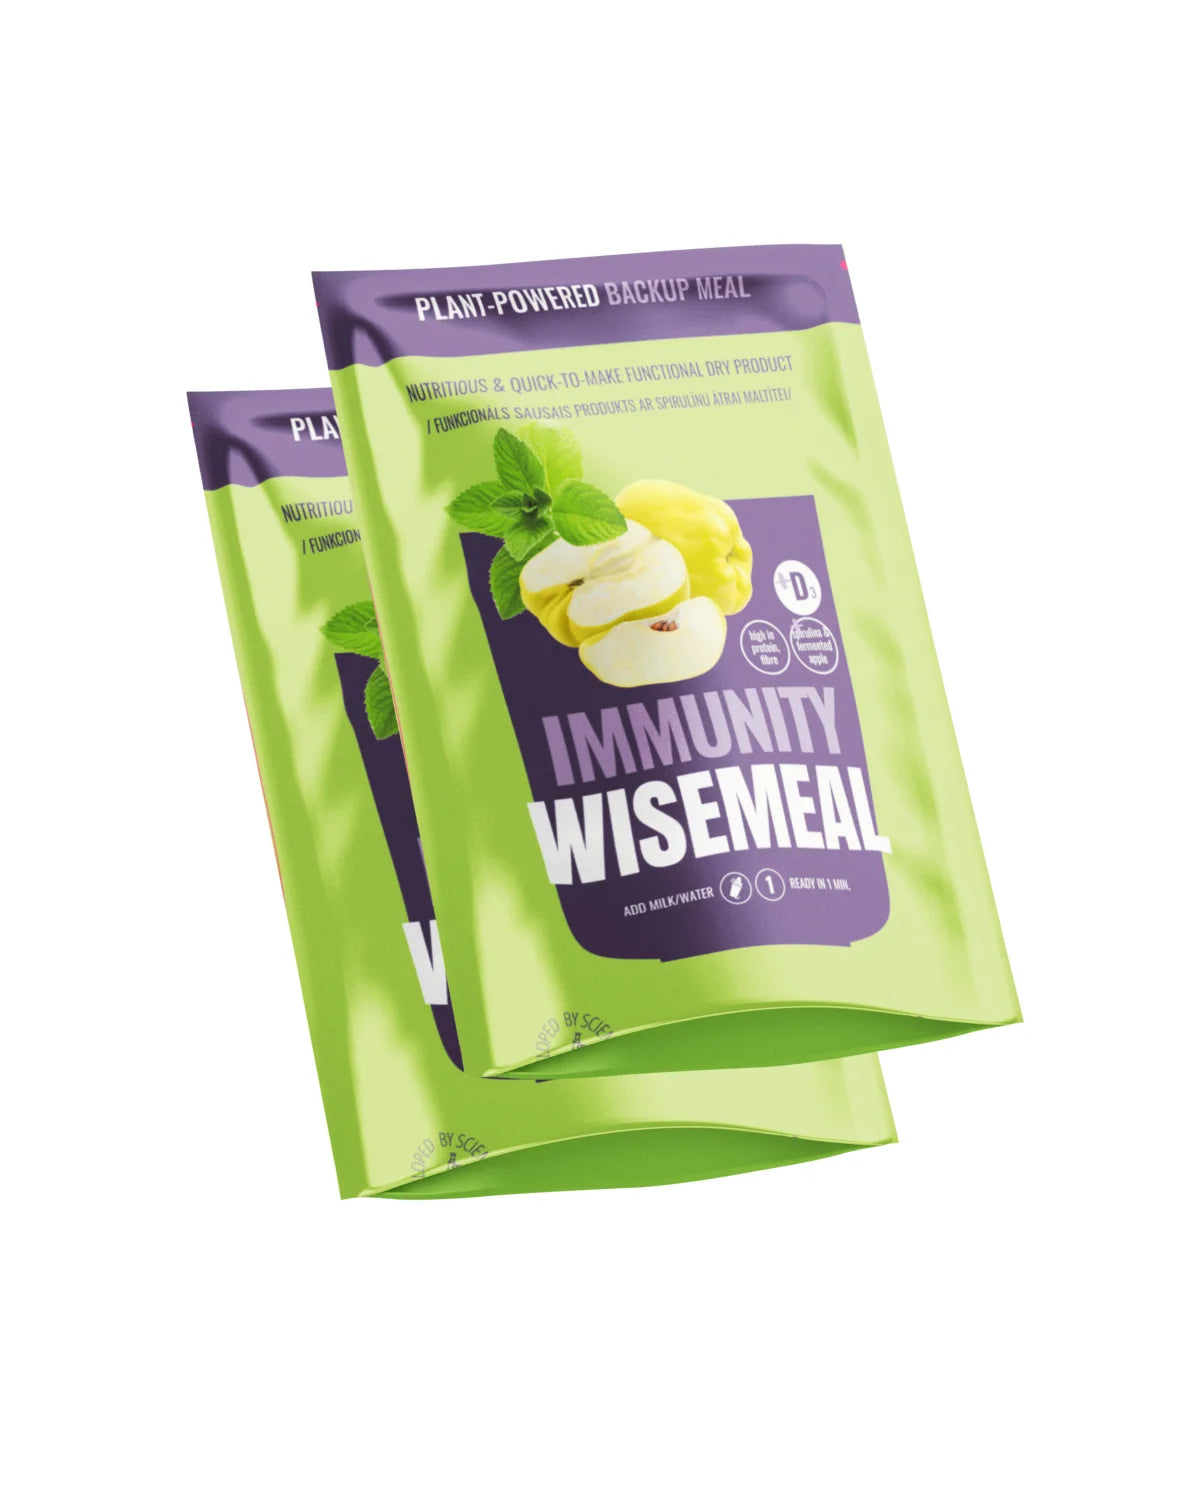 "Immunity" WISEMEAL with spirulina for protein rich smothy